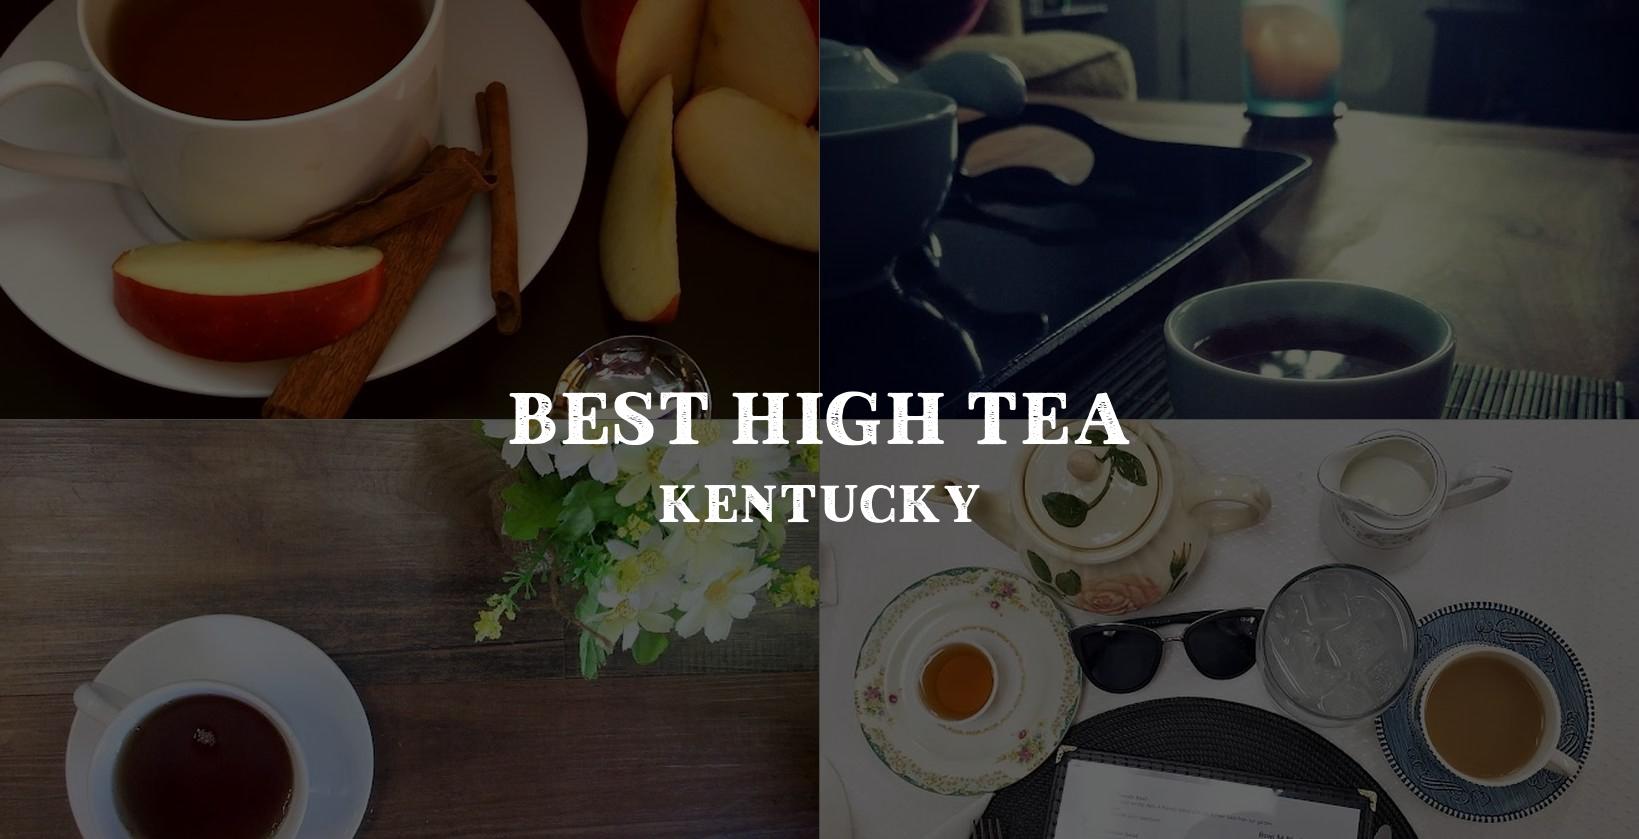 The perfect spot for High Tea in Kentucky